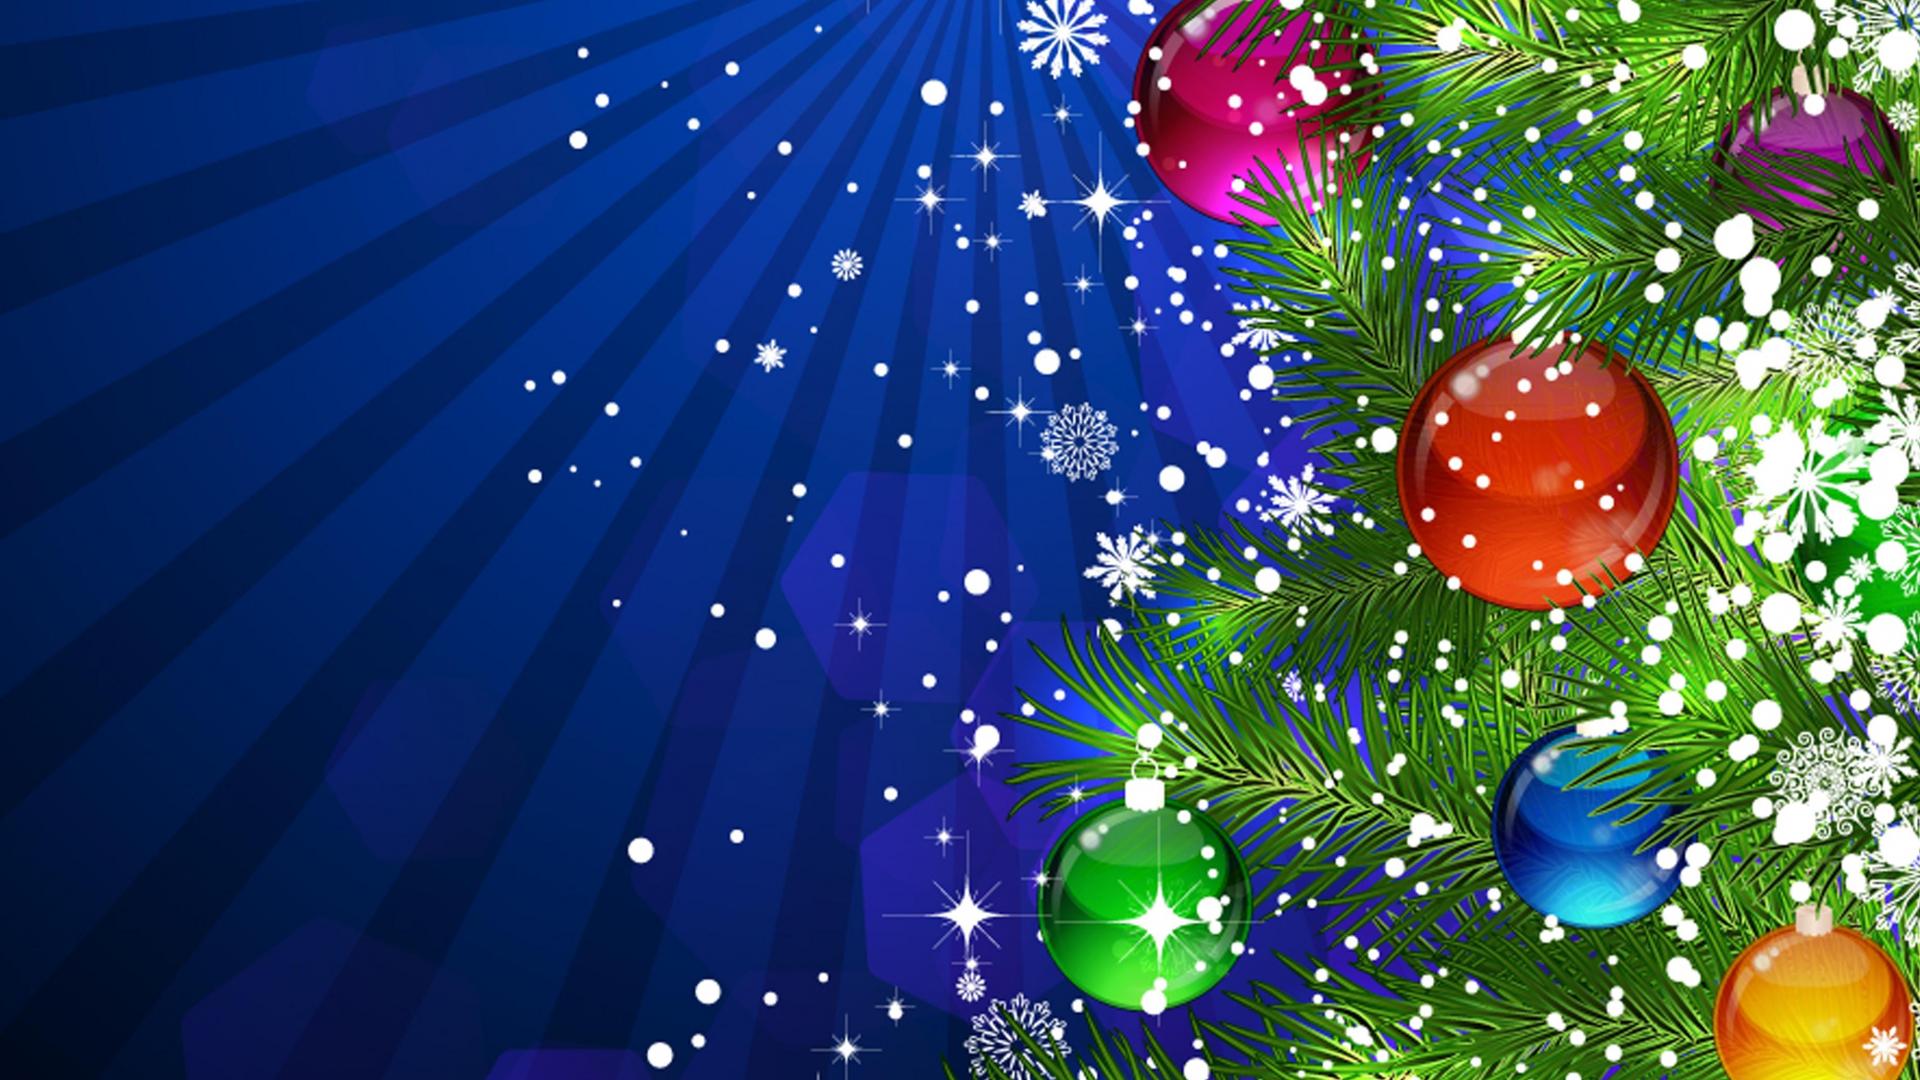 Christmas Background Wallpaper Free Download - Christmas Backgrounds Free  Download - 1920x1080 Wallpaper 